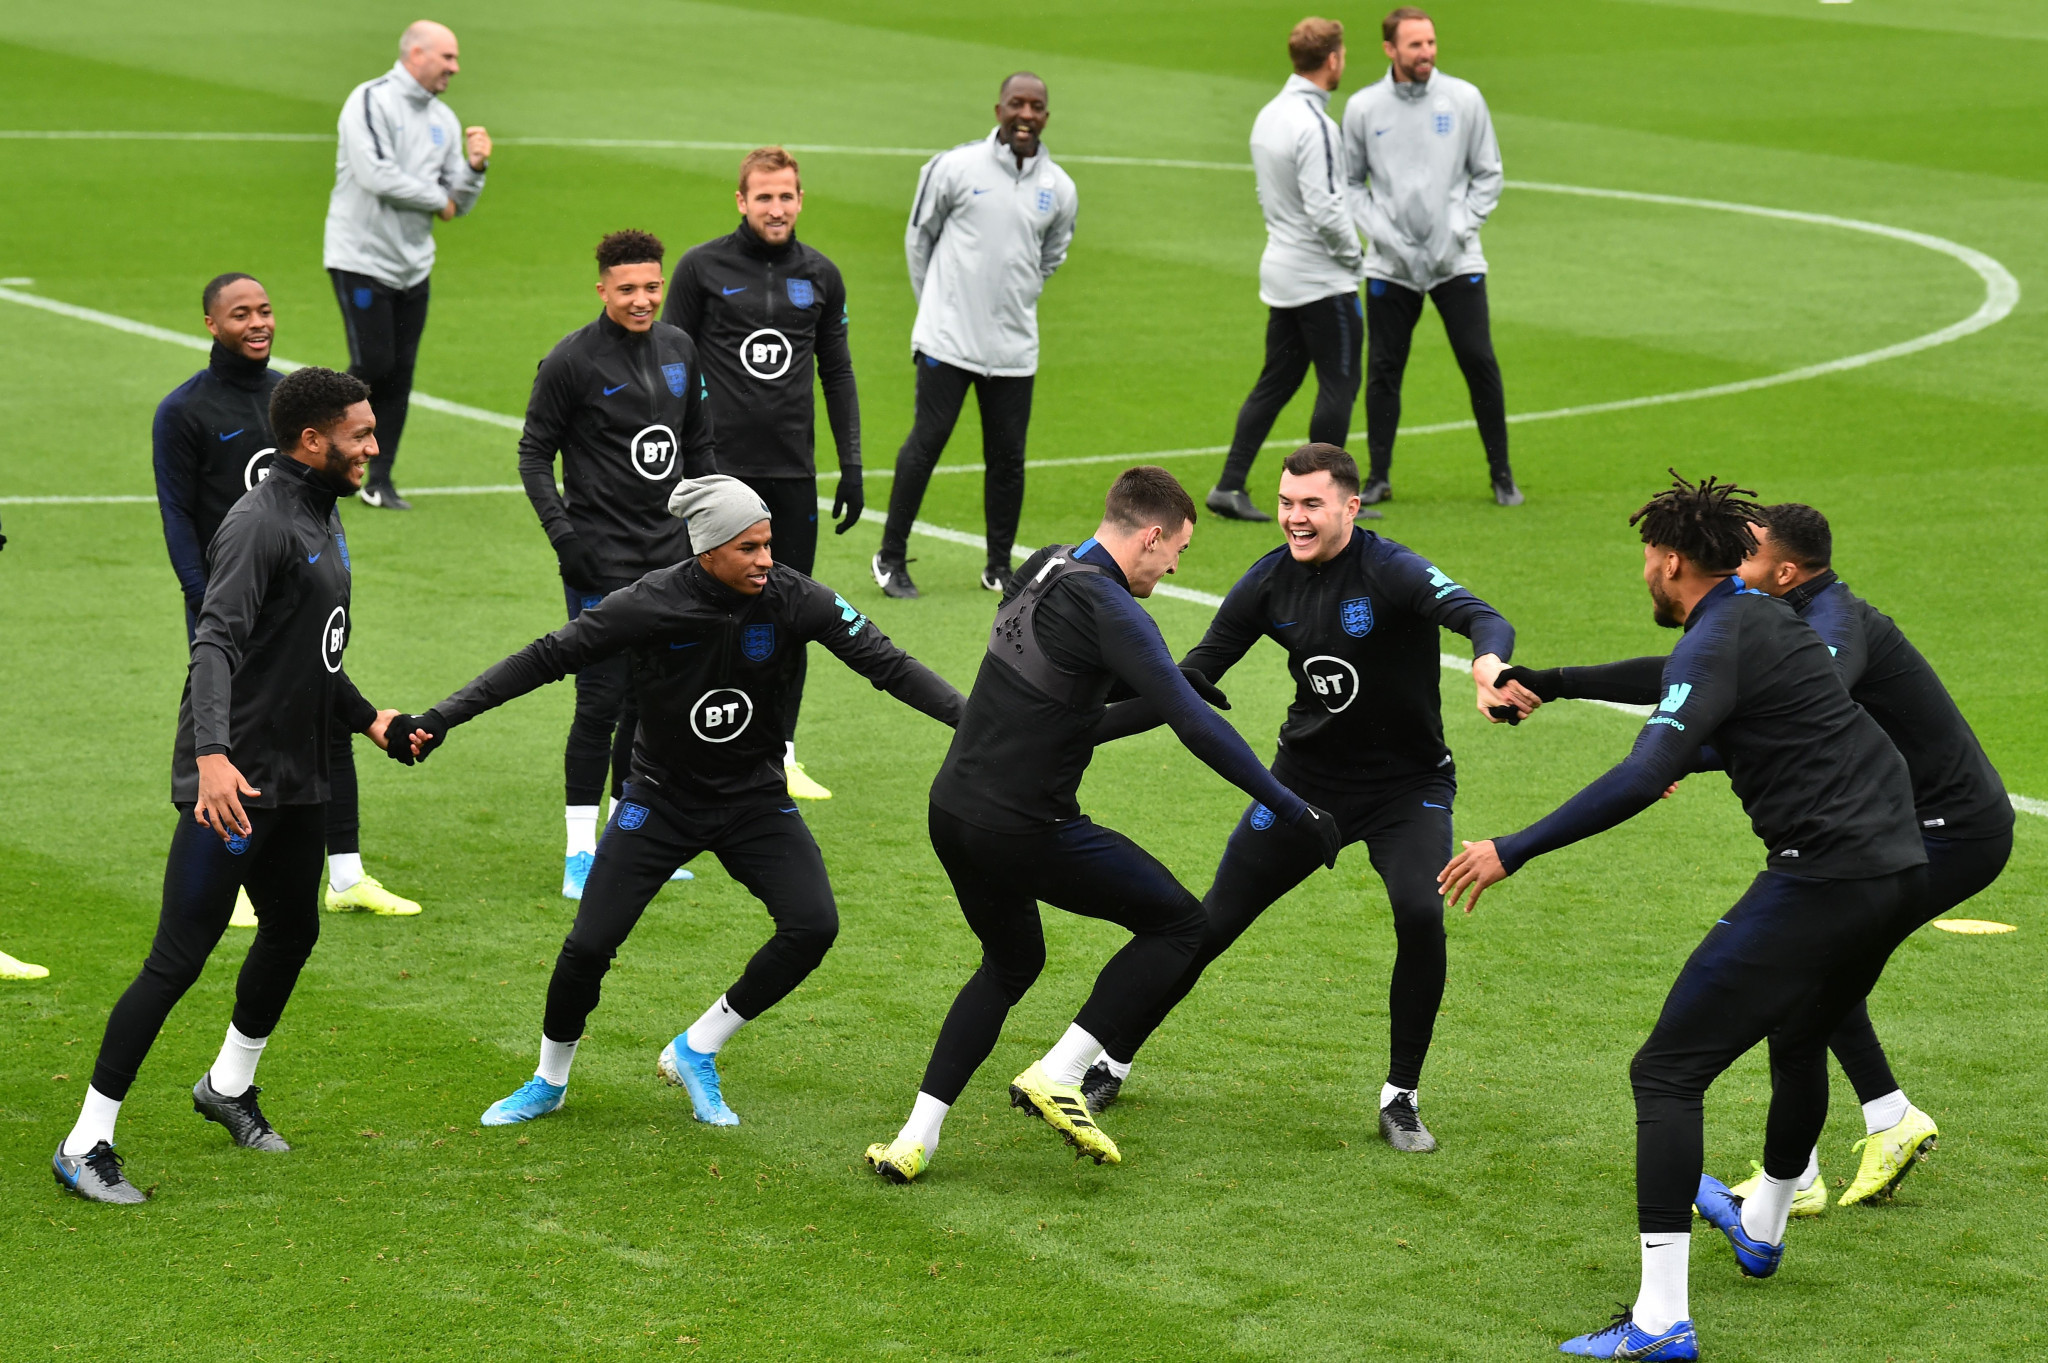 England's men's football team playing kabaddi in training in Southampton in 2019 ©Getty Images